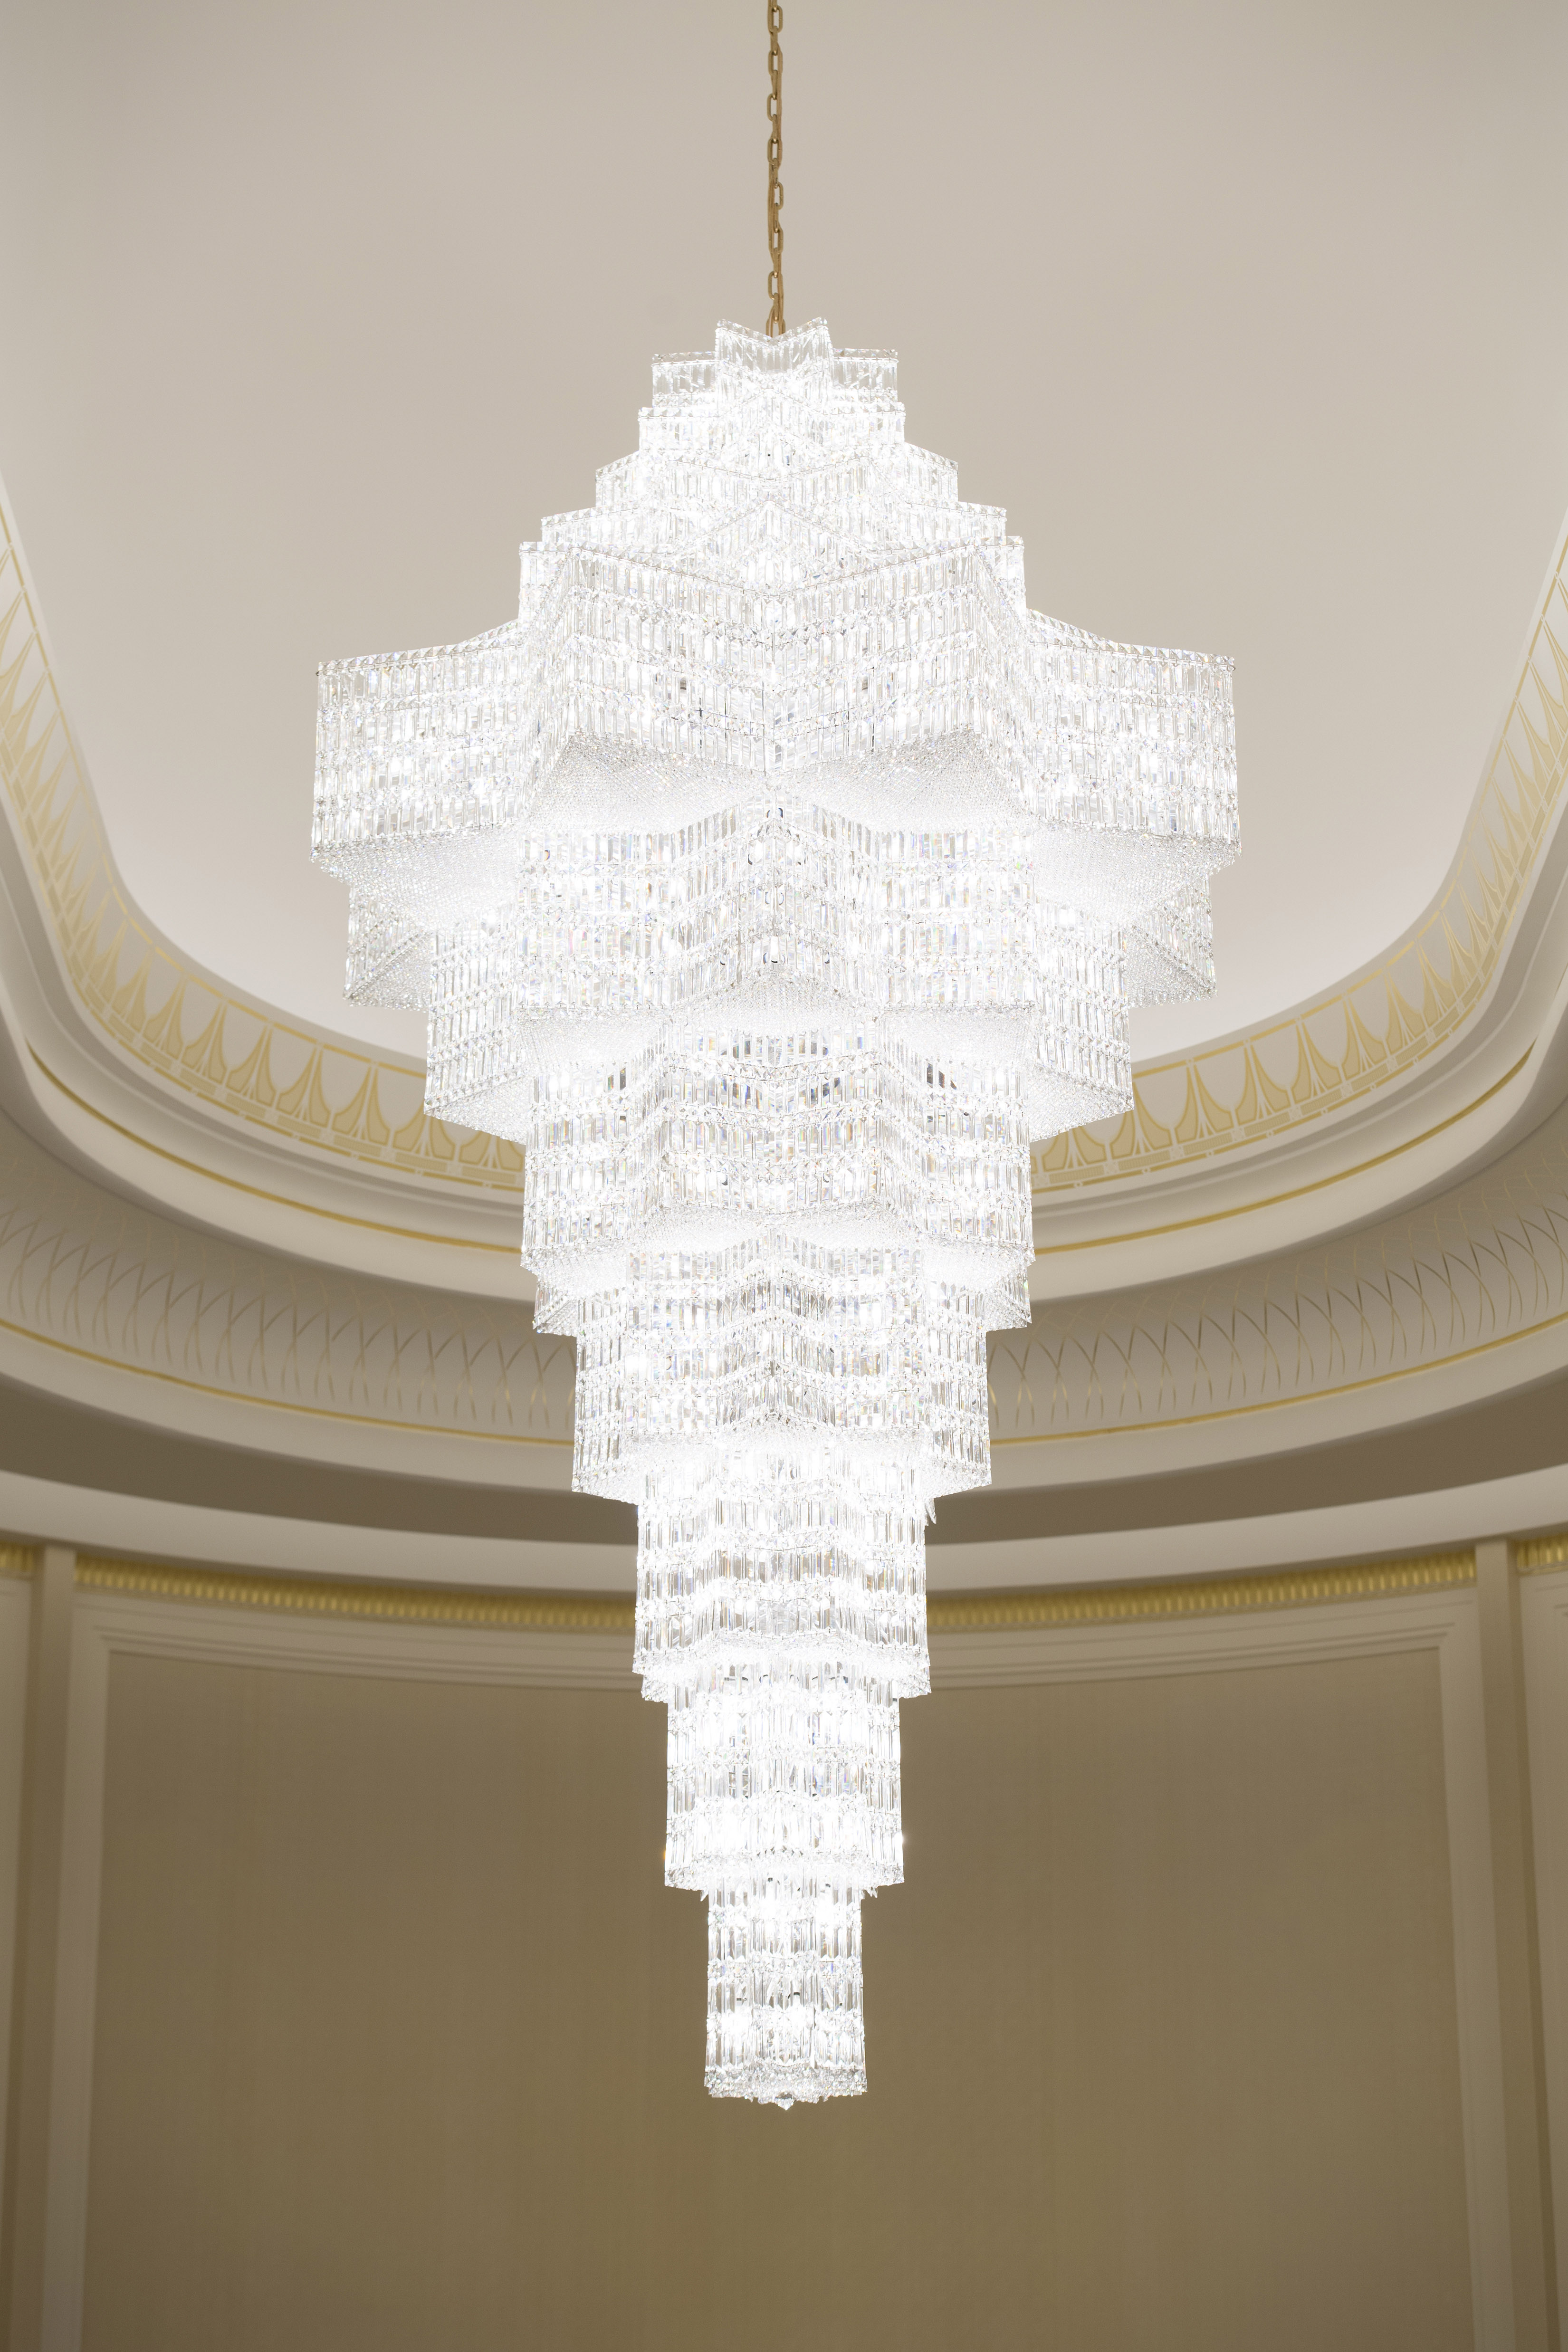 A close-up on an illuminated chandelier, a large tower of glass hanging from the ceiling.